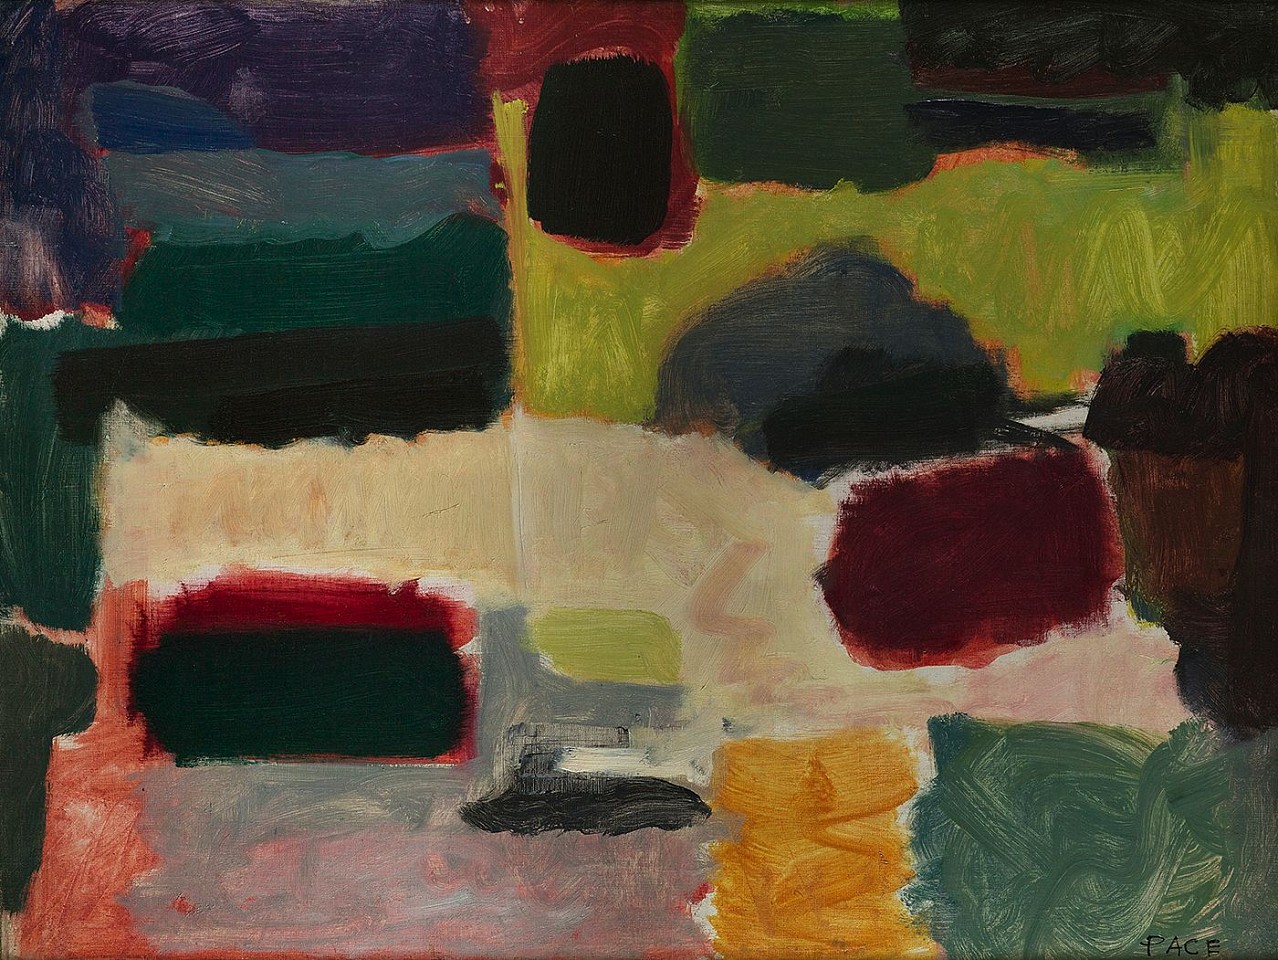 Stephen Pace, Untitled (50-04) | SOLD, 1950
Oil on canvas, 24 x 32 in. (61 x 81.3 cm)
PAC-00033